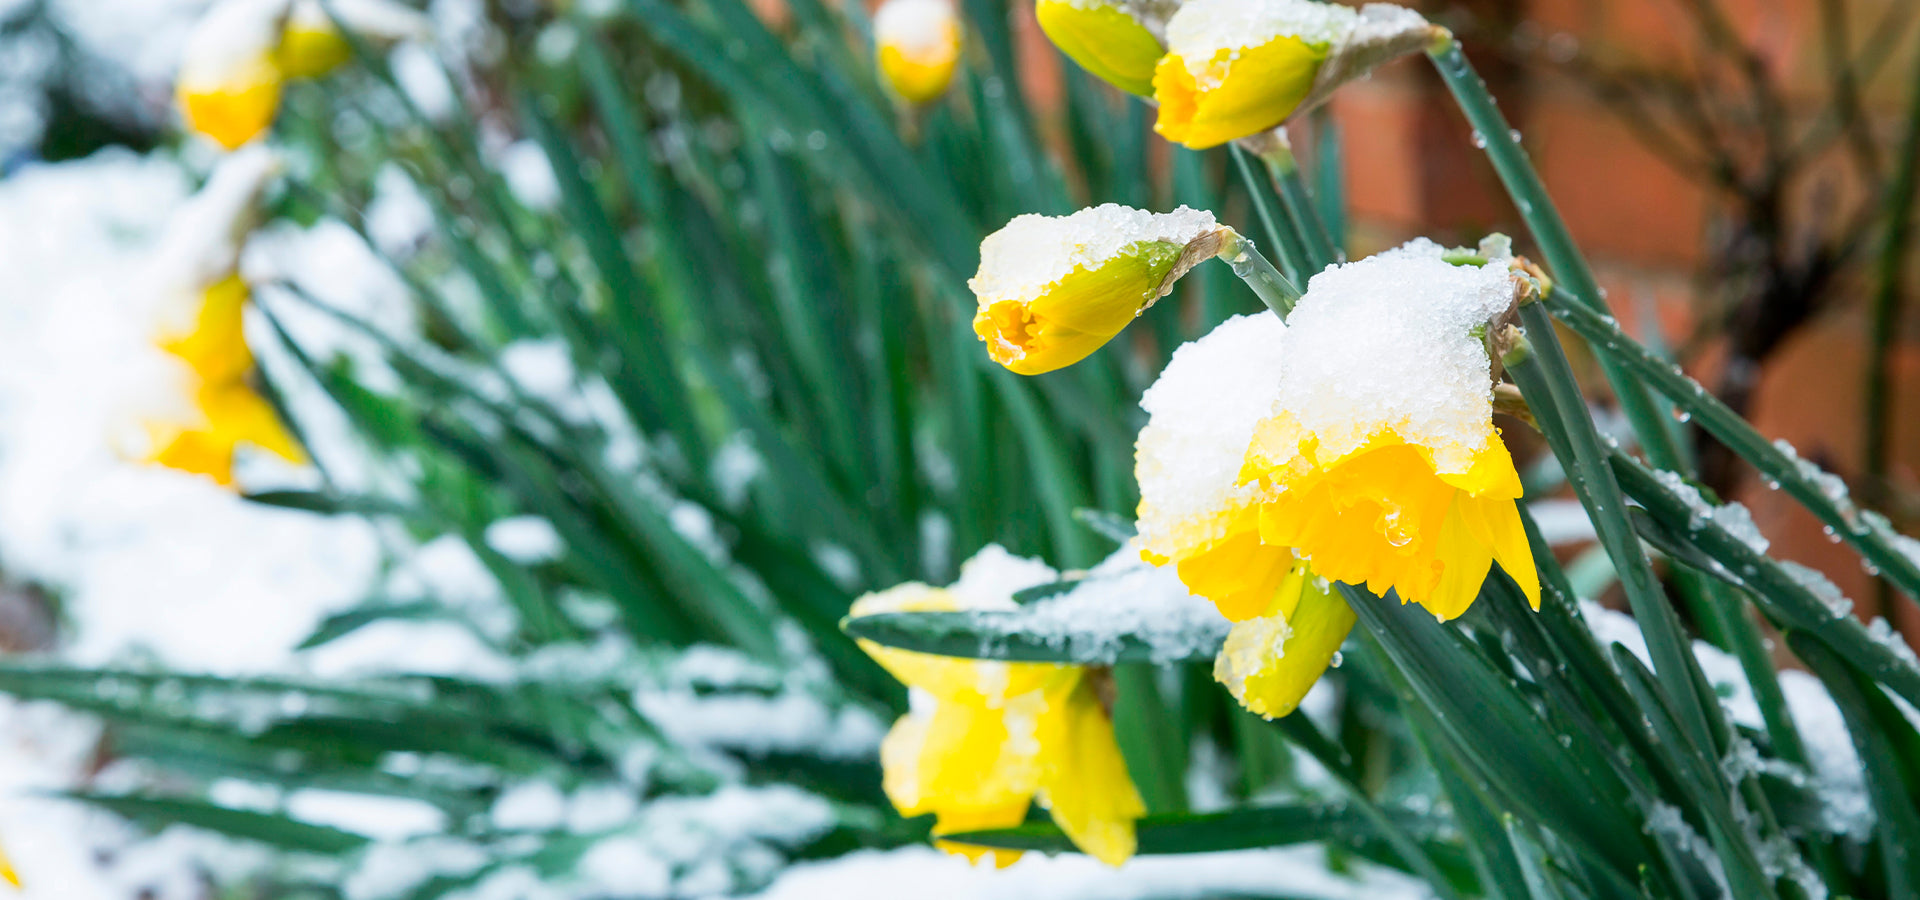 5 WINTER FLOWERS YOU HAVE TO KNOW